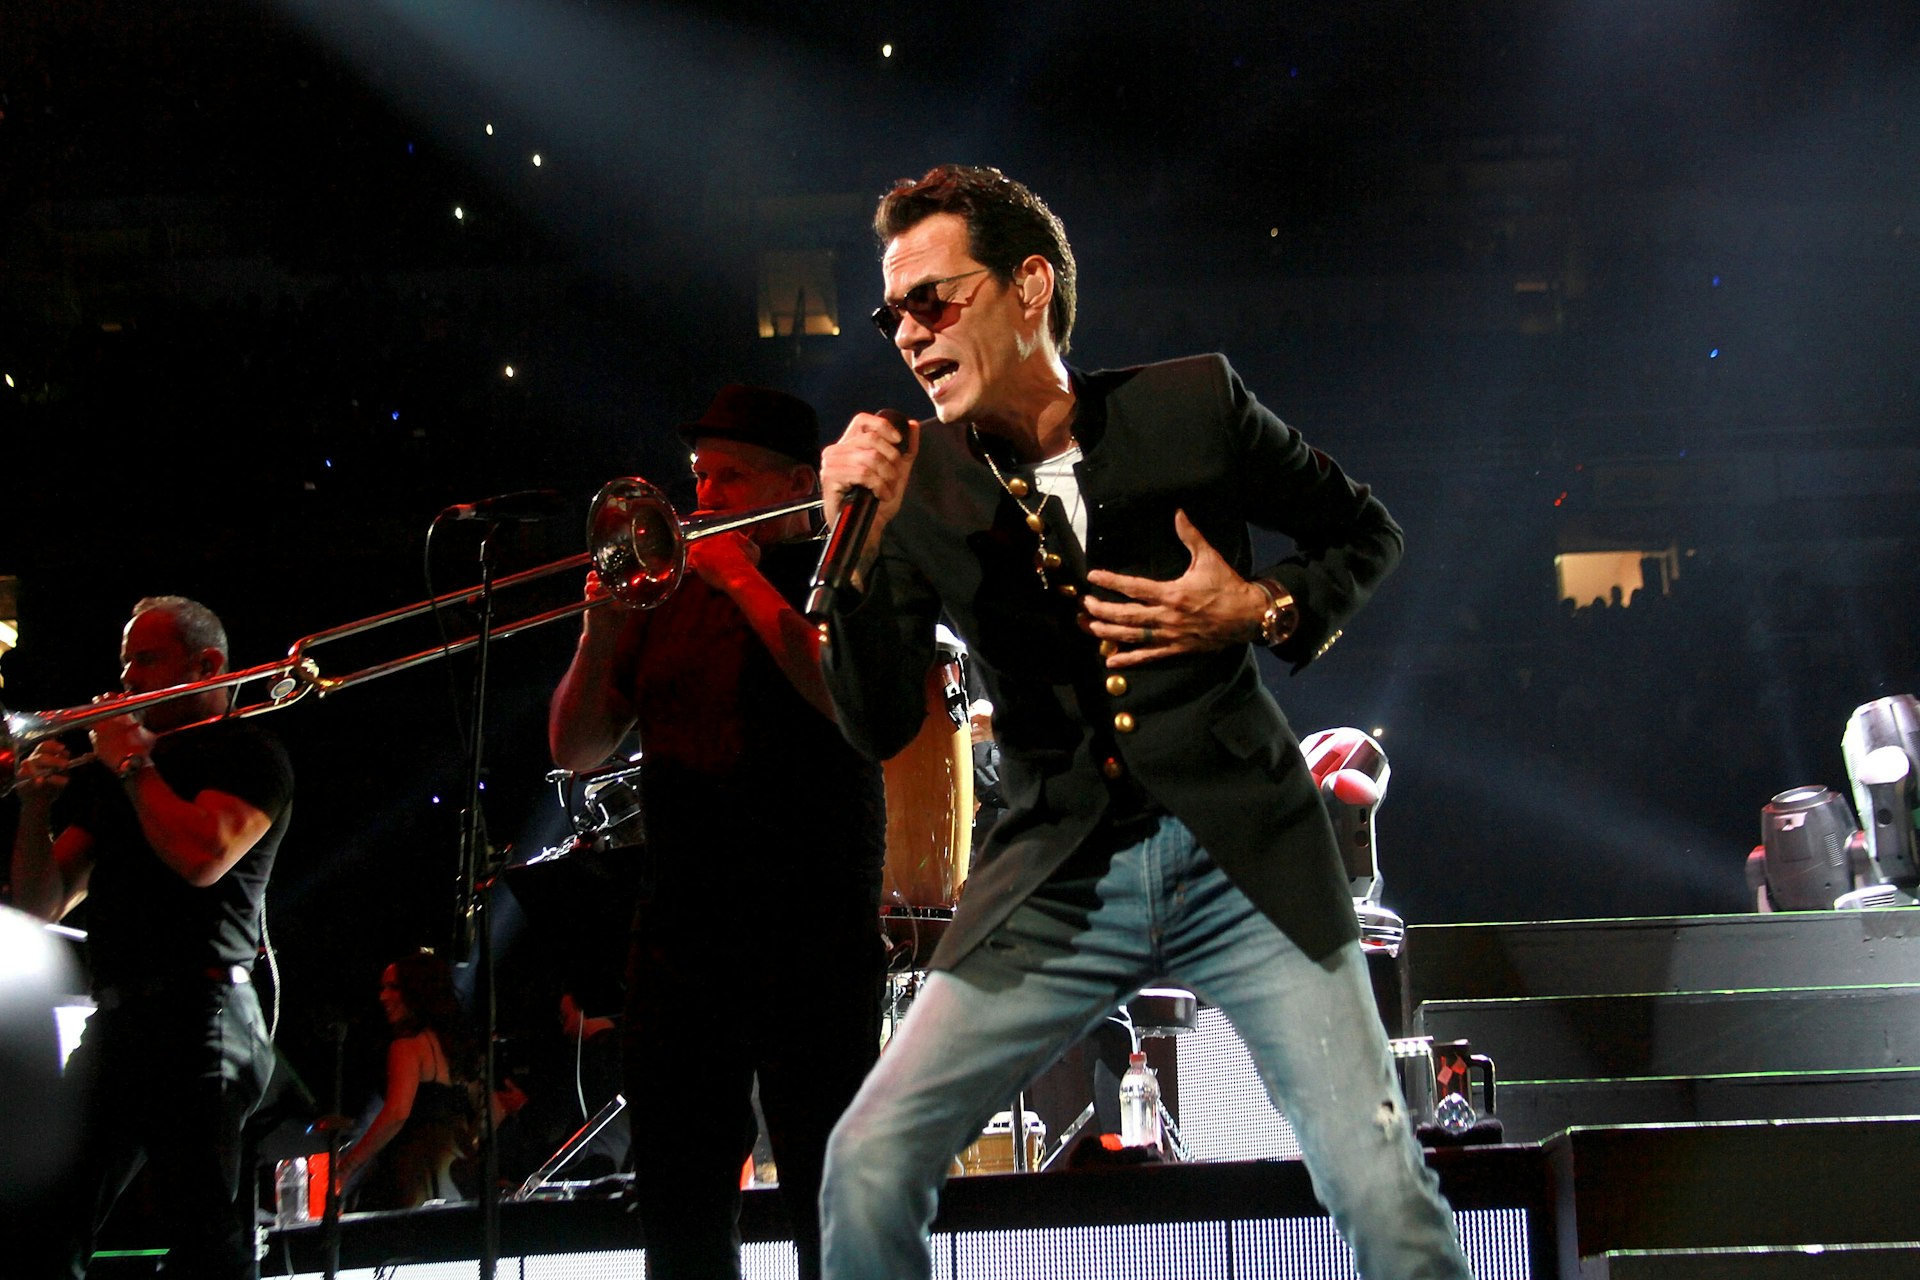 Marc Anthony performs in his concert "Marc Anthony Live!" at Coliseo Jose Miguel Agrelot in San Juan, Puerto Rico.